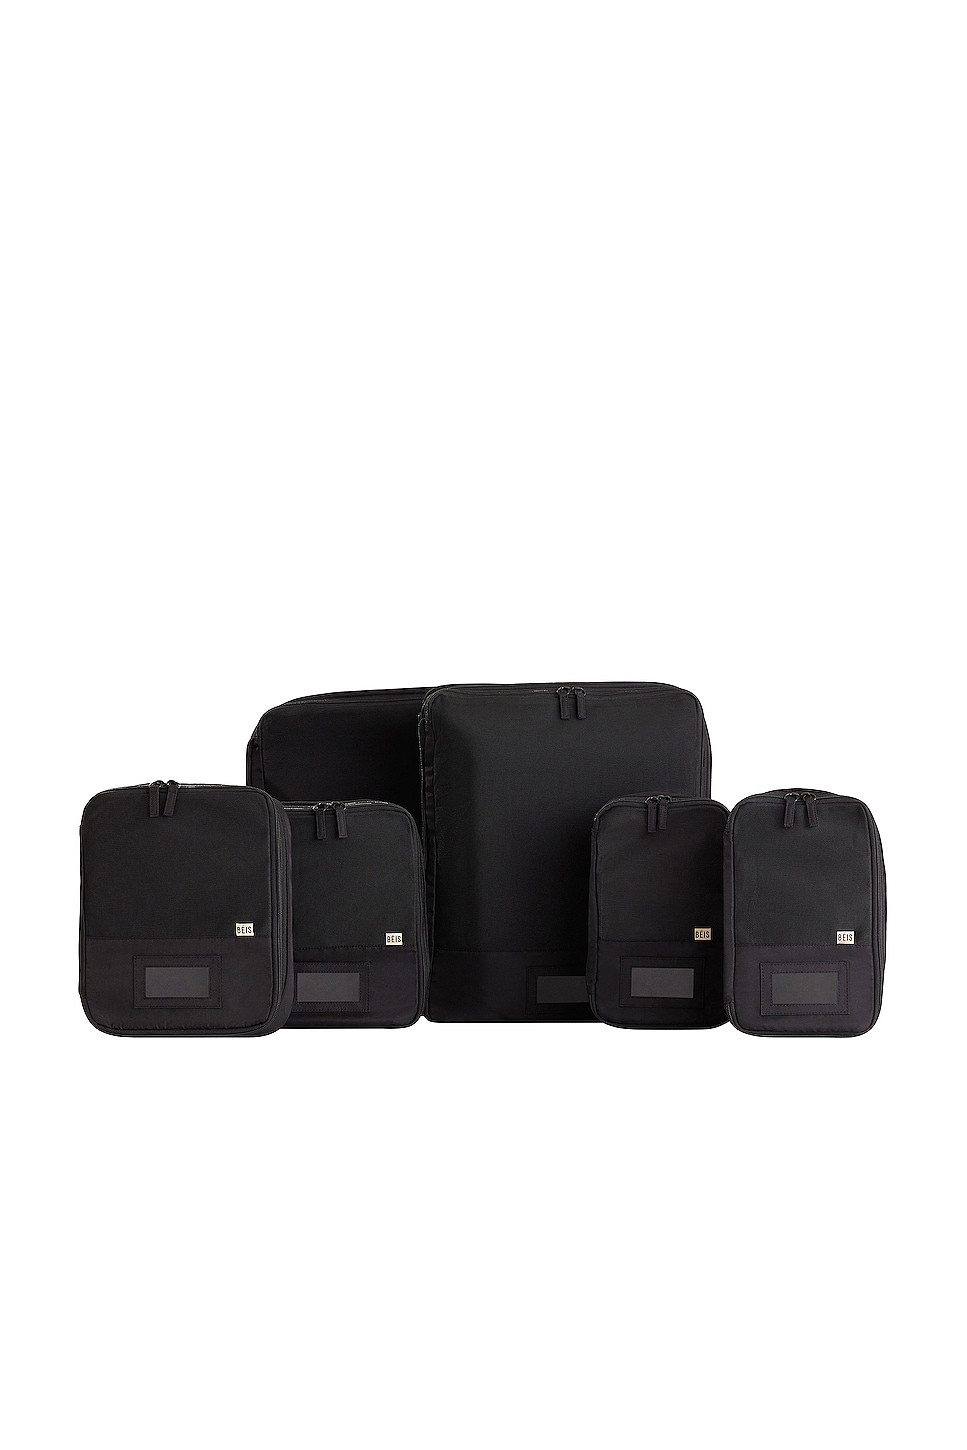 BEIS 6 Piece Compression Packing Cubes in Black.